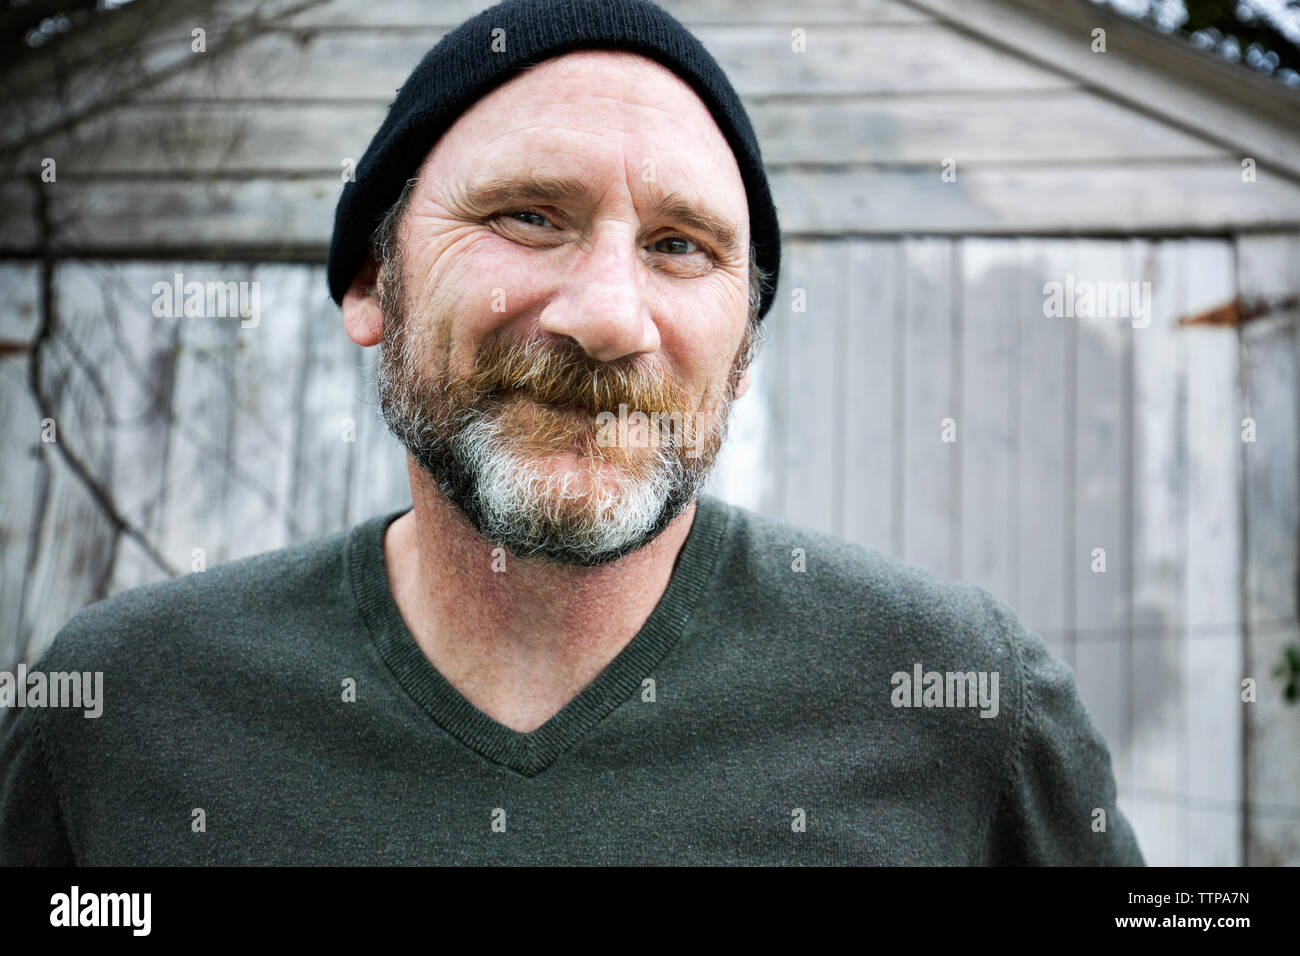 Close-up portrait of smiling man wearing knit hat Stock Photo